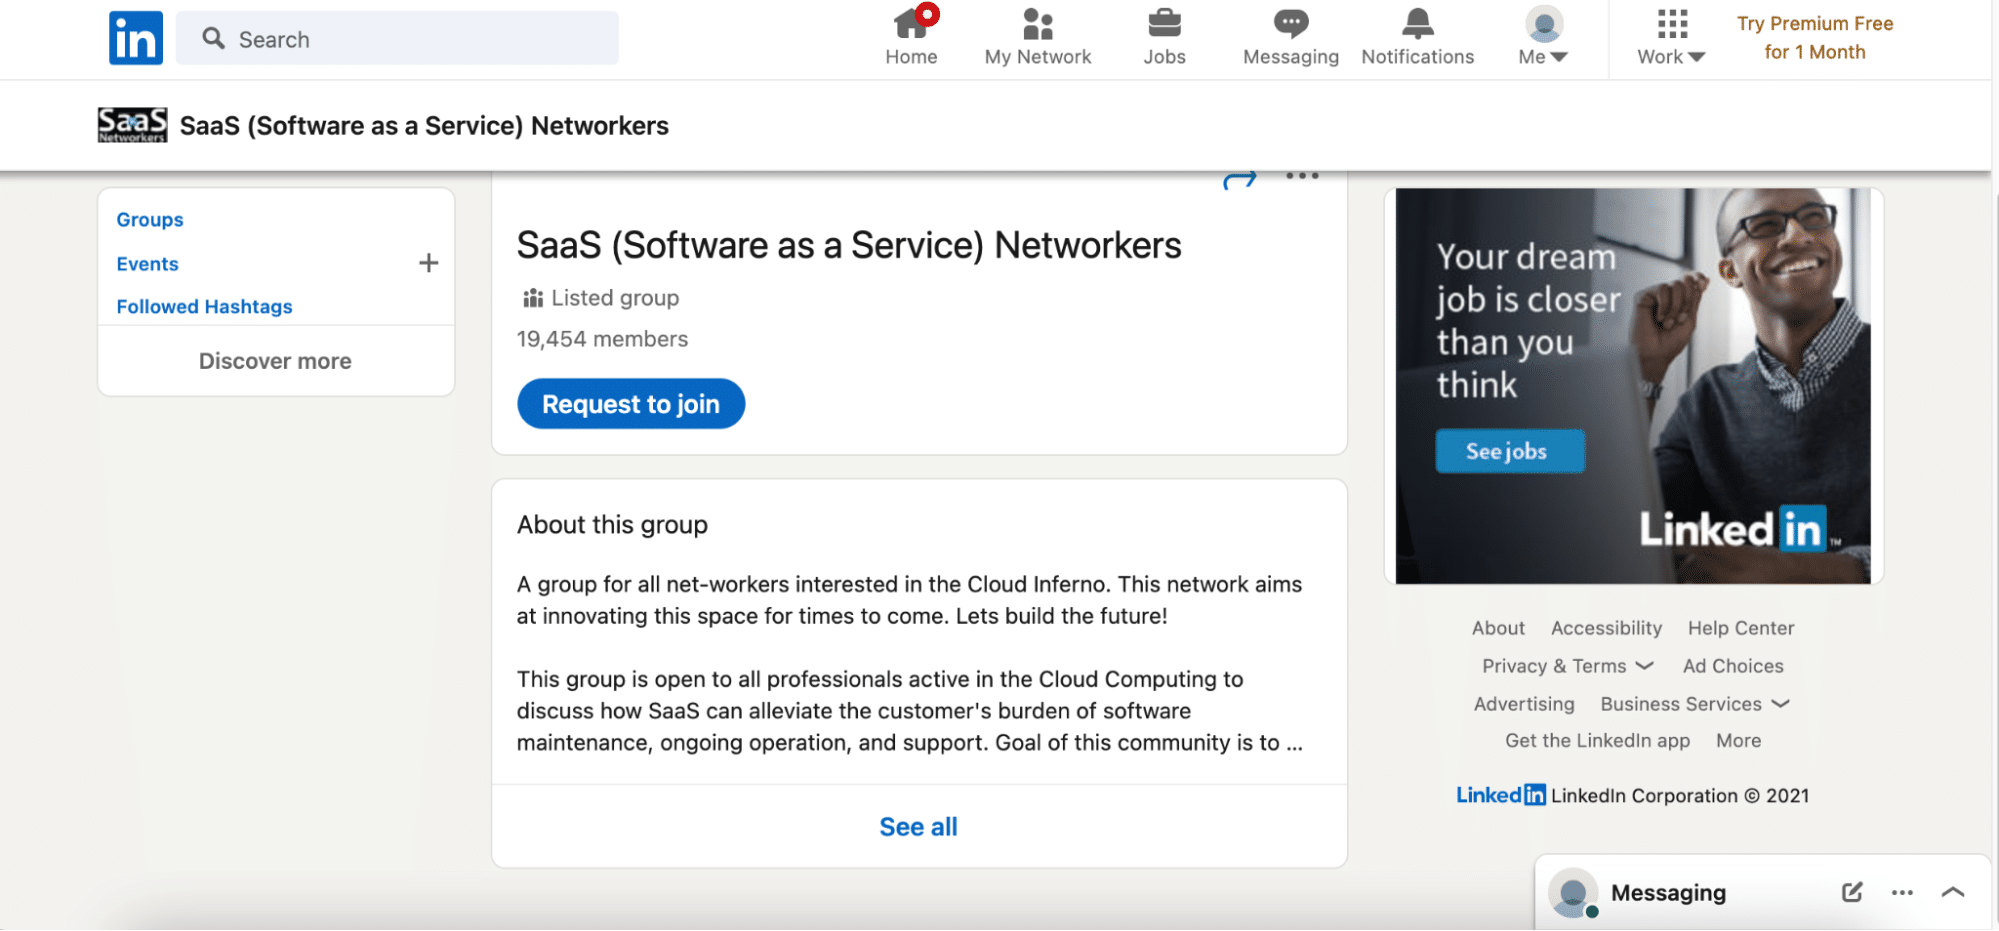 screenshot of LinkedIn's page for SaaS Networkers